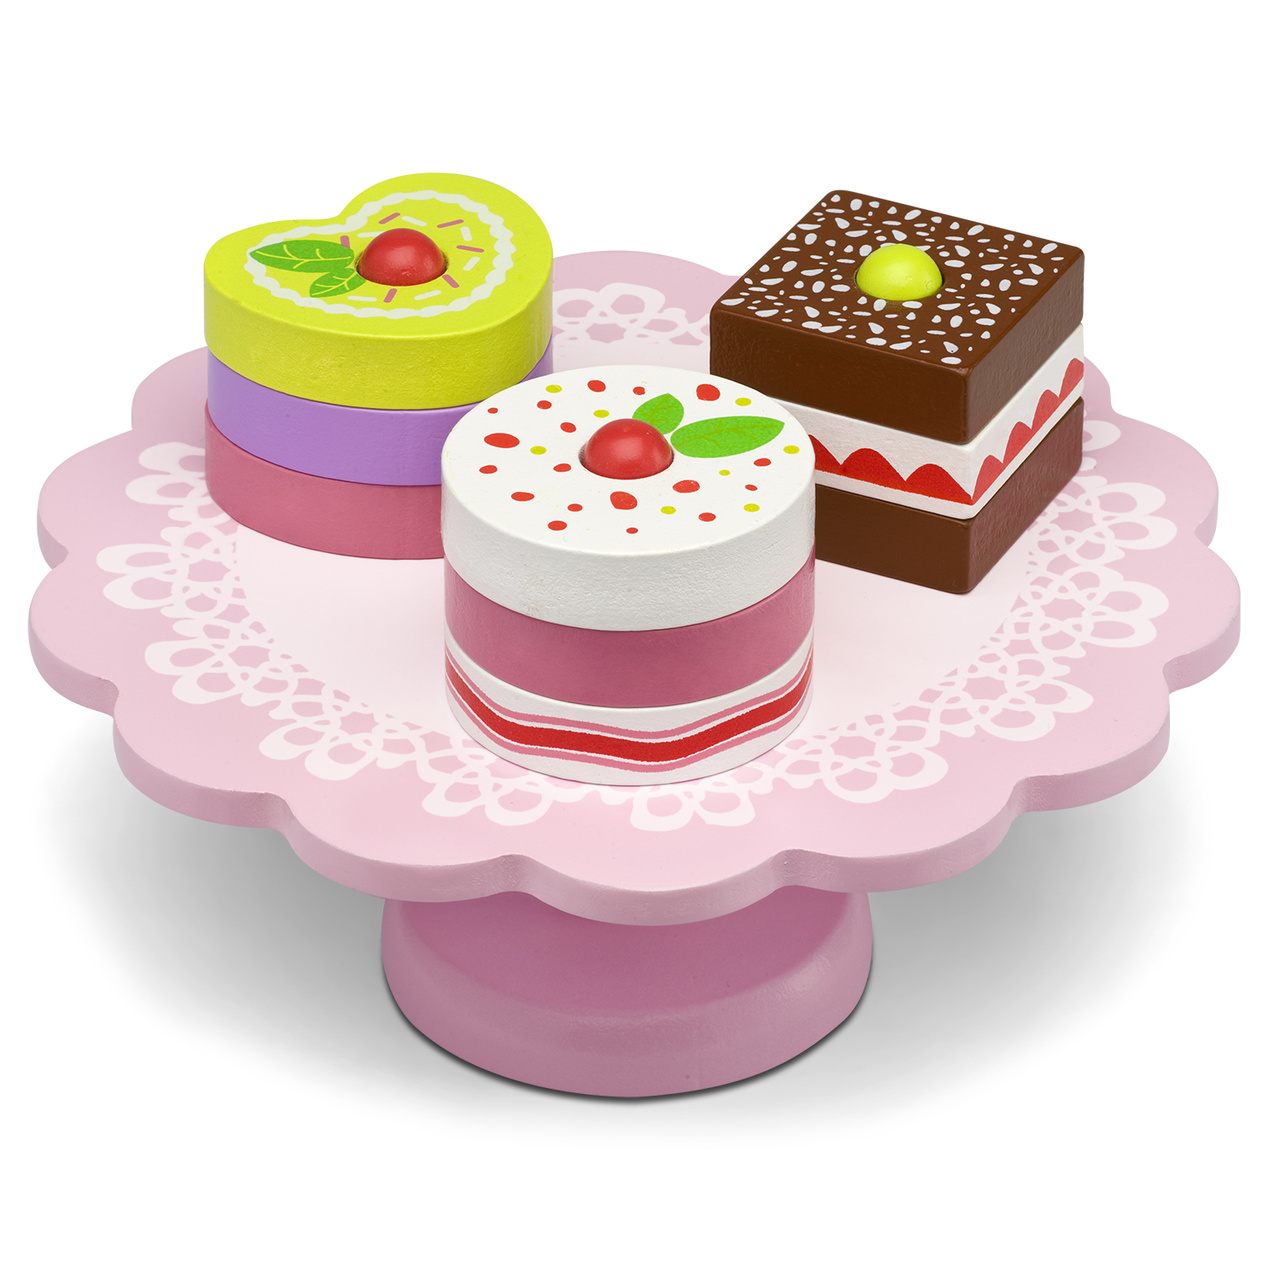 Outlet micki cake stand with toy cakes